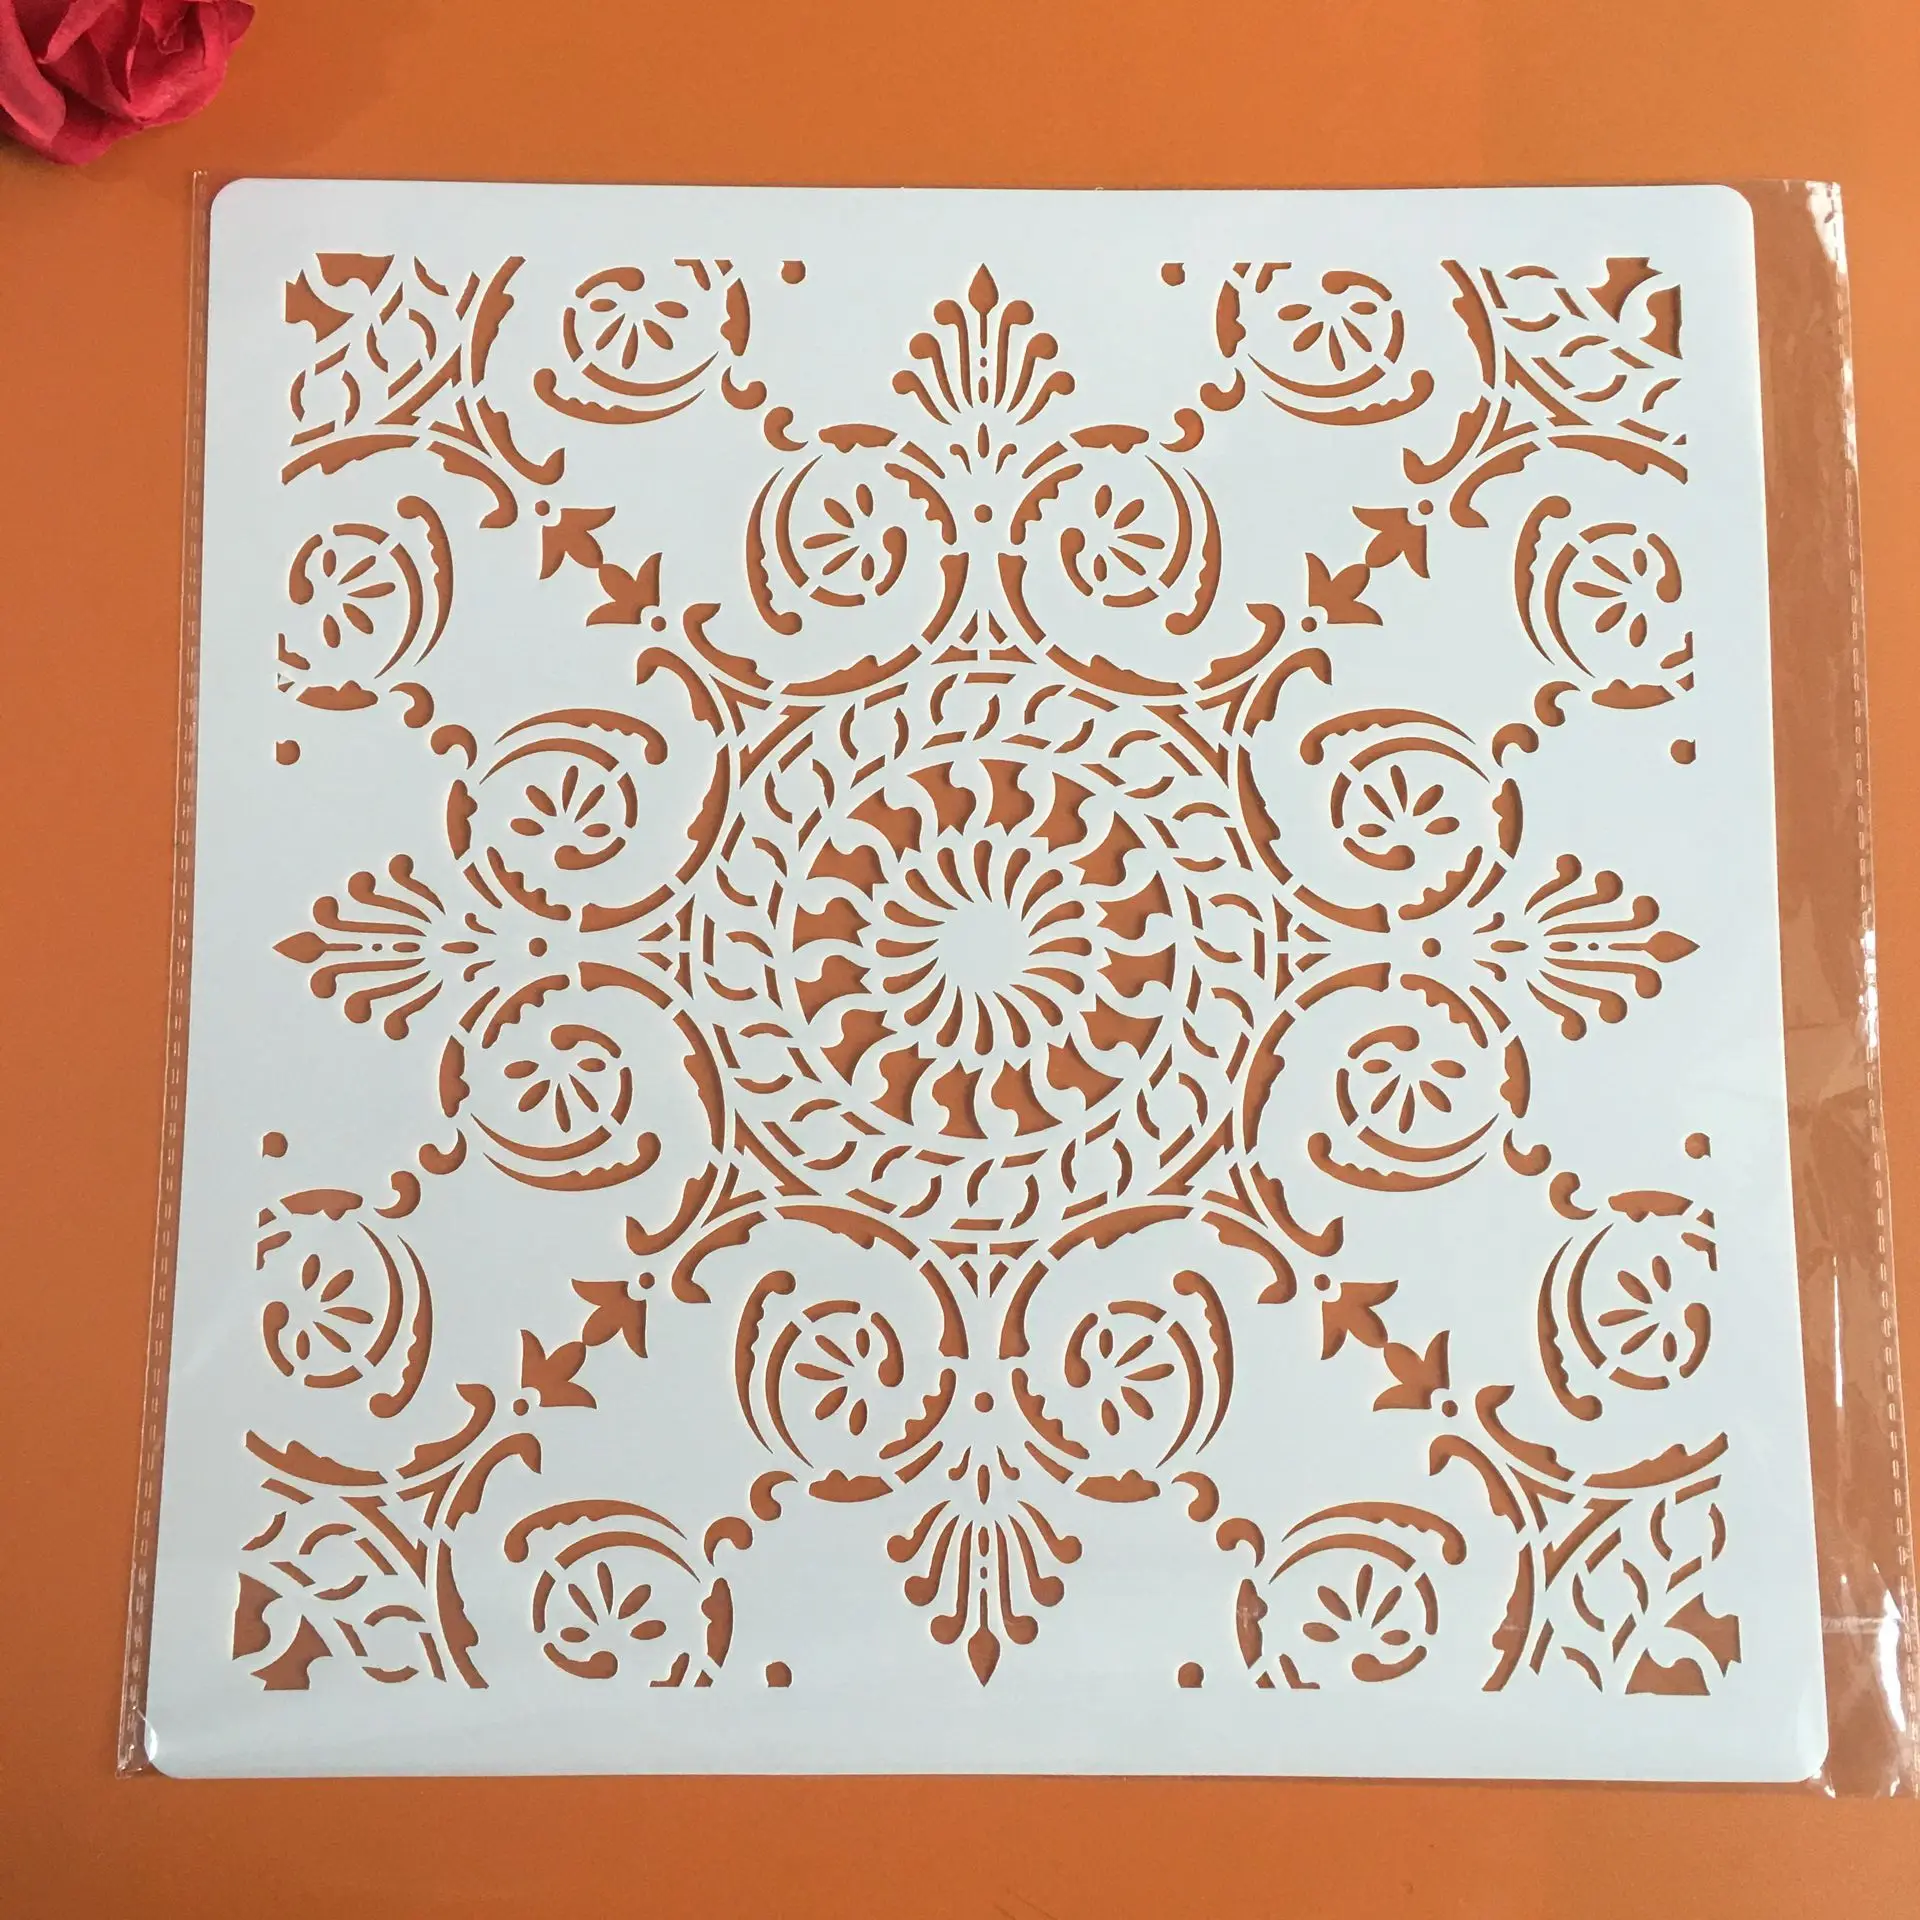 30 * 30cm diy craft mandala mold for painting stencils stamped photo album embossed paper card on wood, fabric,wall,Floor,